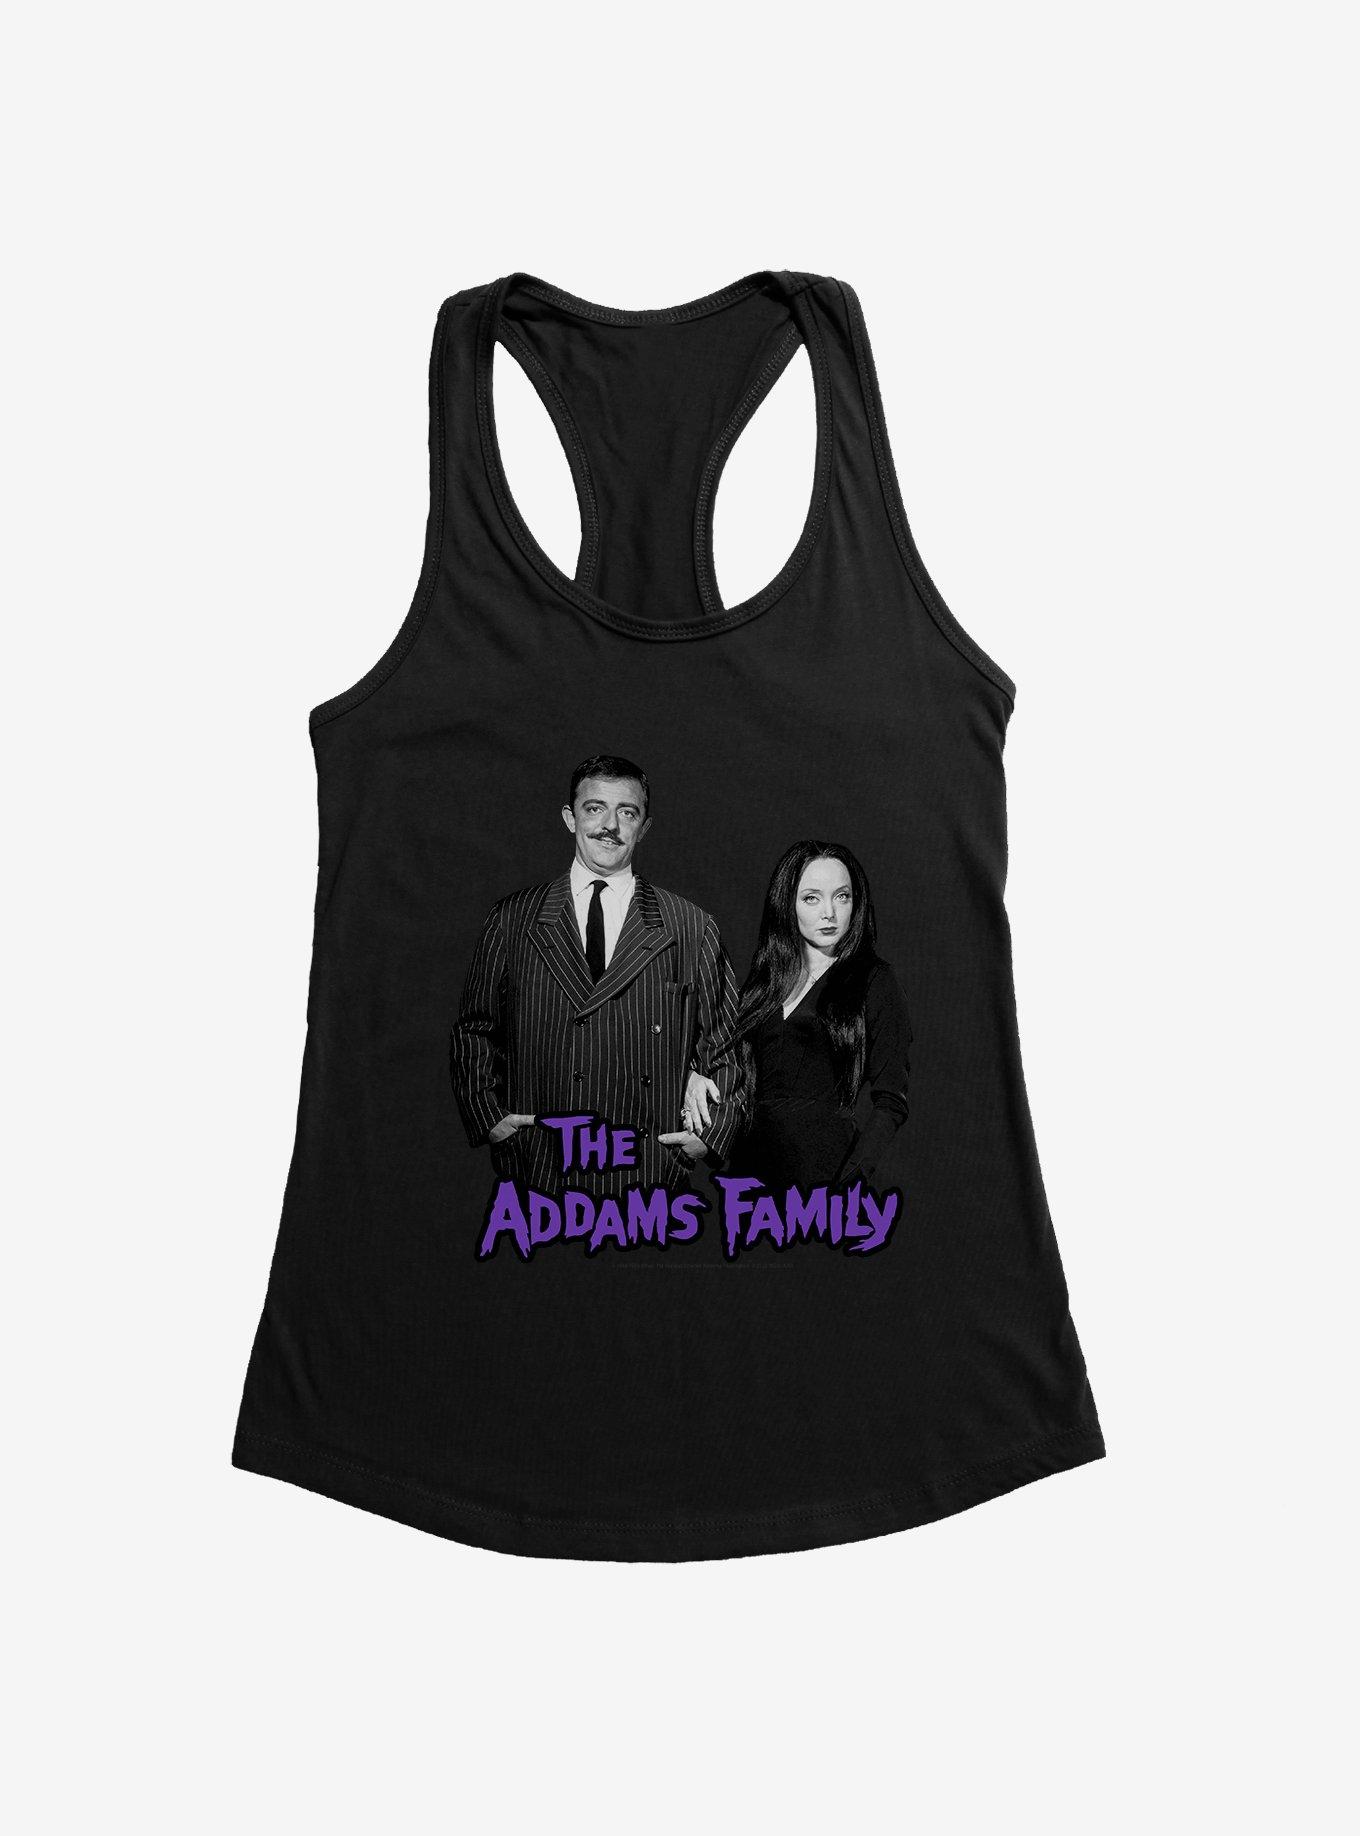 The Addams Family Gomez And Morticia Addams Girls Tank, BLACK, hi-res